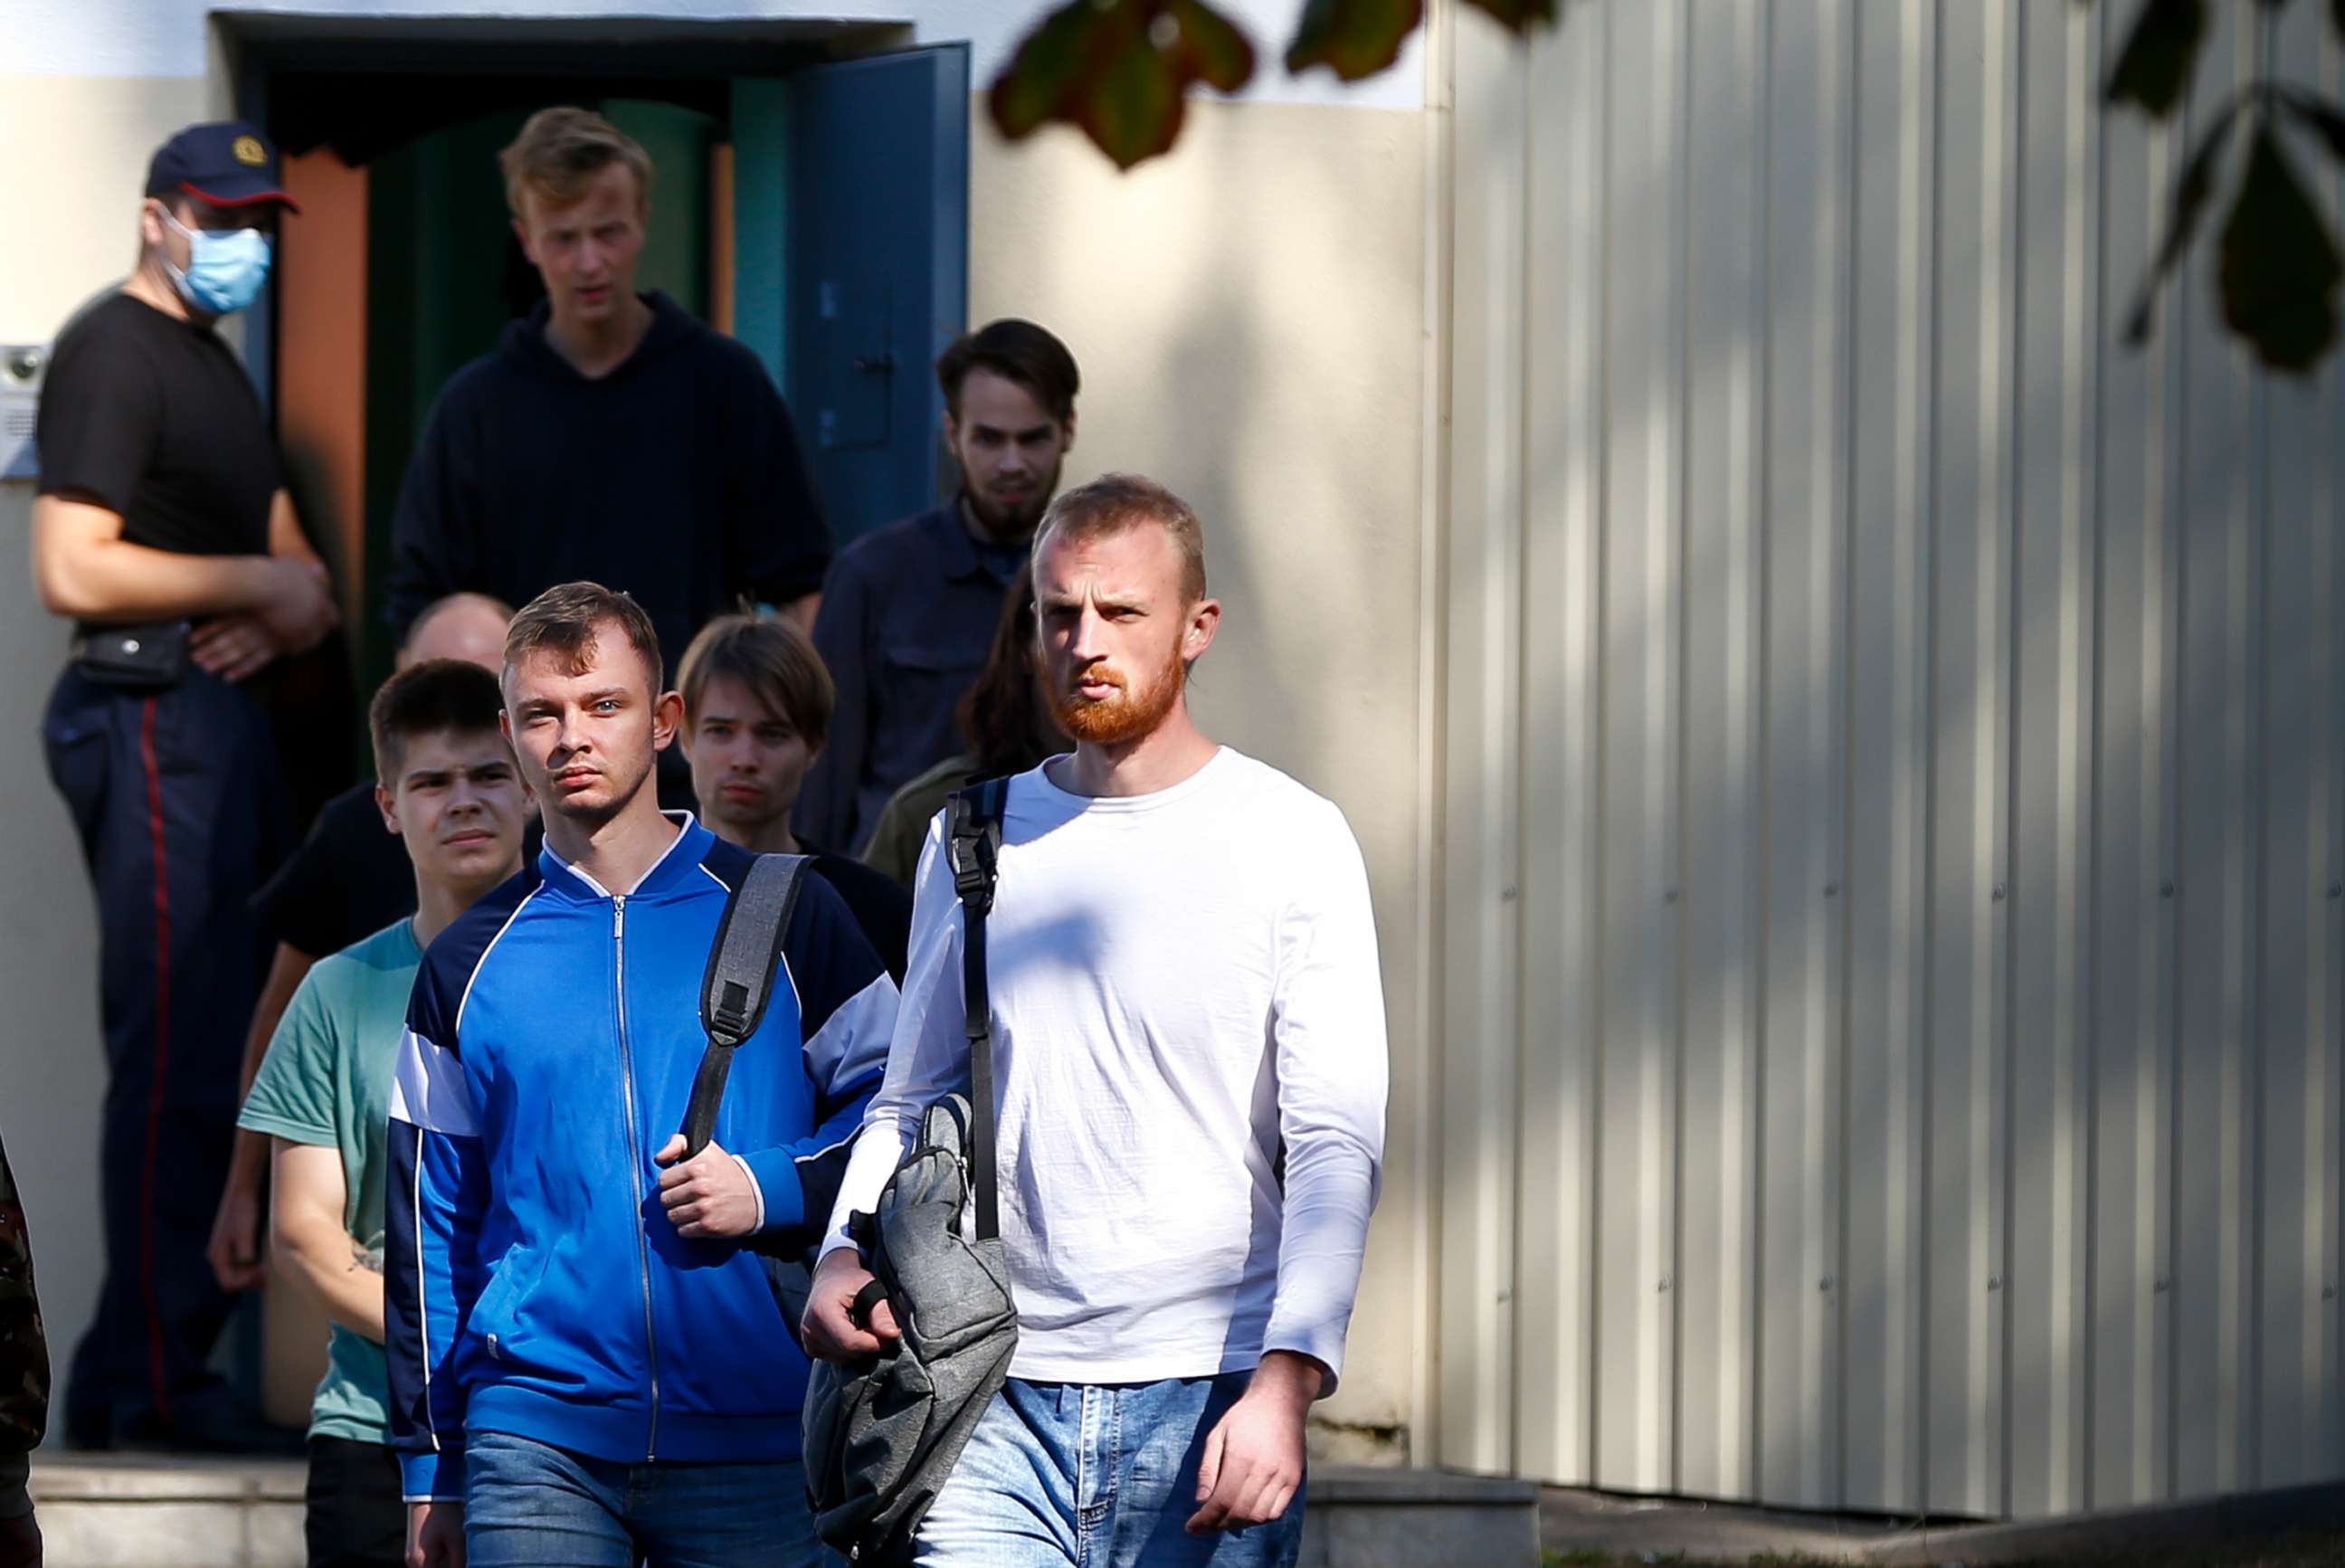 PHOTO: Men are released from a detention center where protesters were detained during a mass rally following the presidential election in Minsk, Belarus, Aug. 14, 2020.